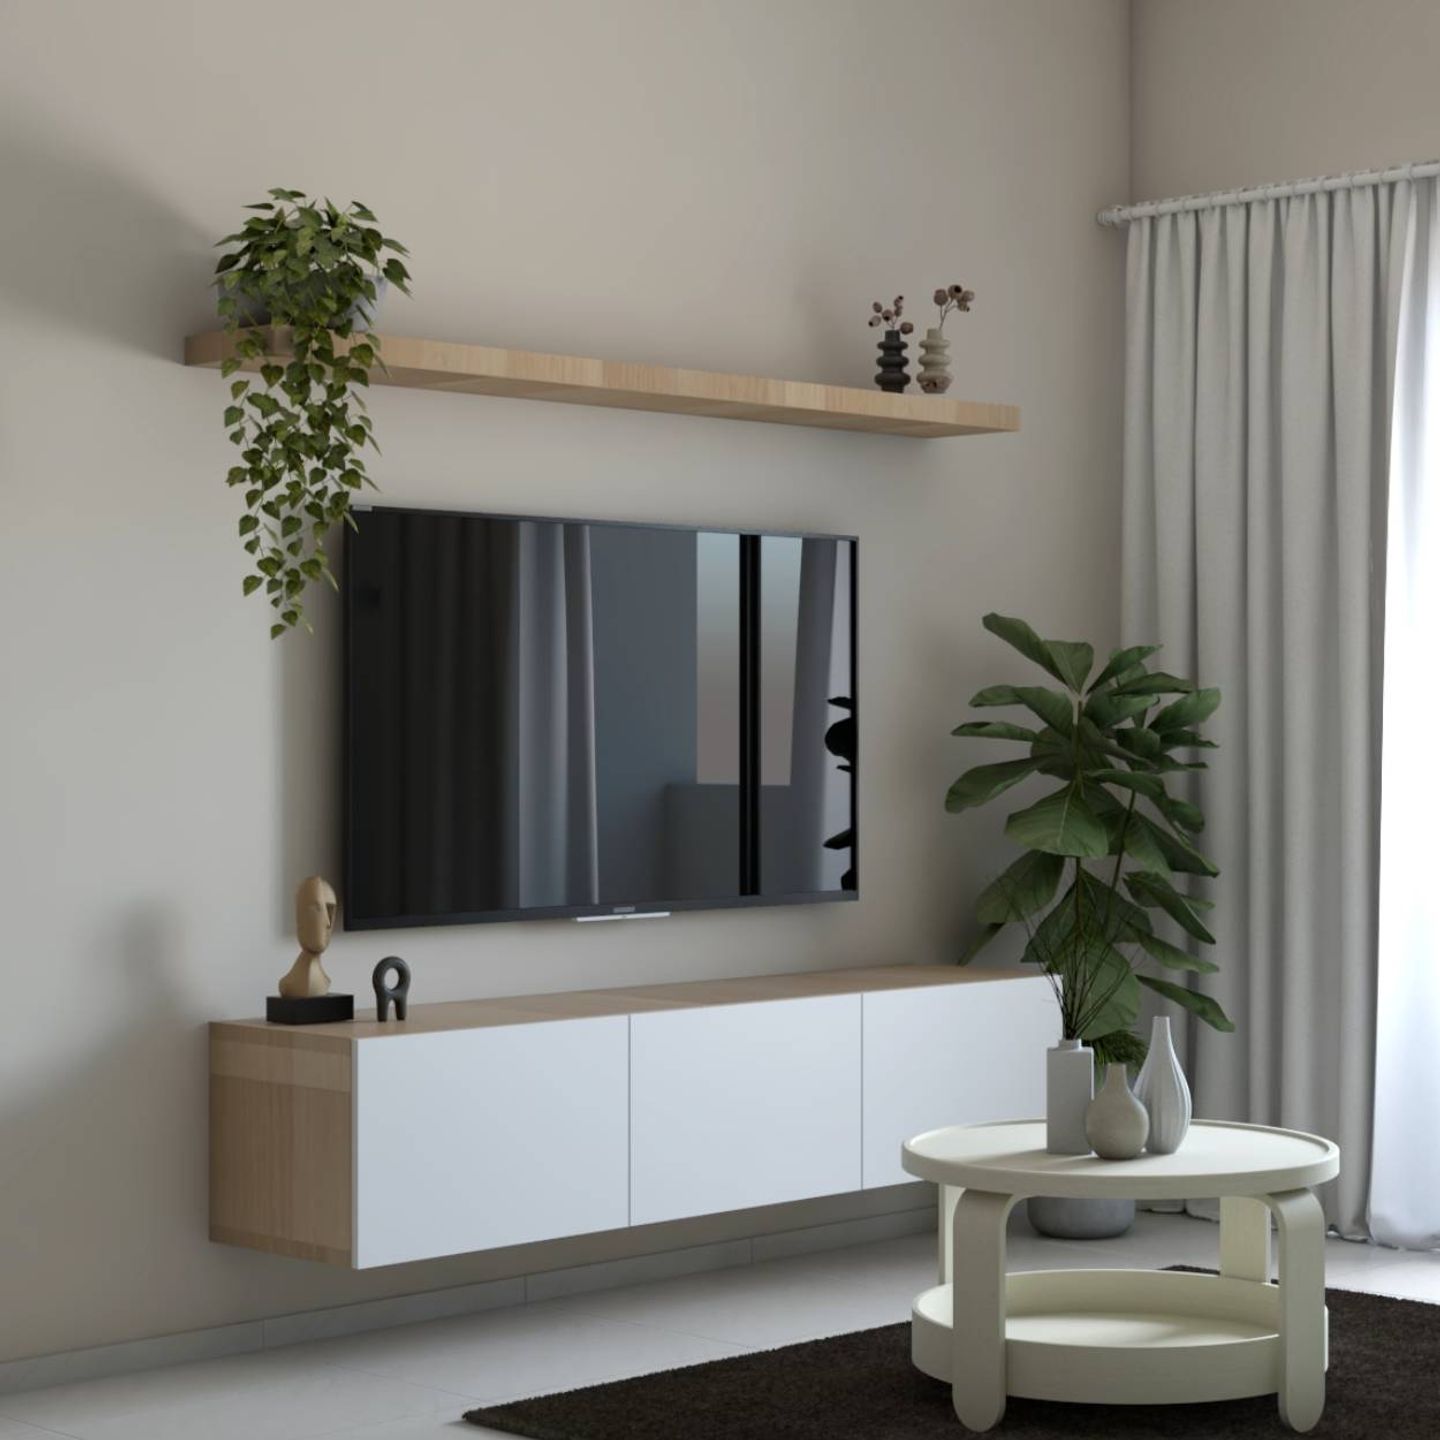 Scandinavian White And Brown Wall-Mounted TV Unit With Overhead Shelf - Livspace